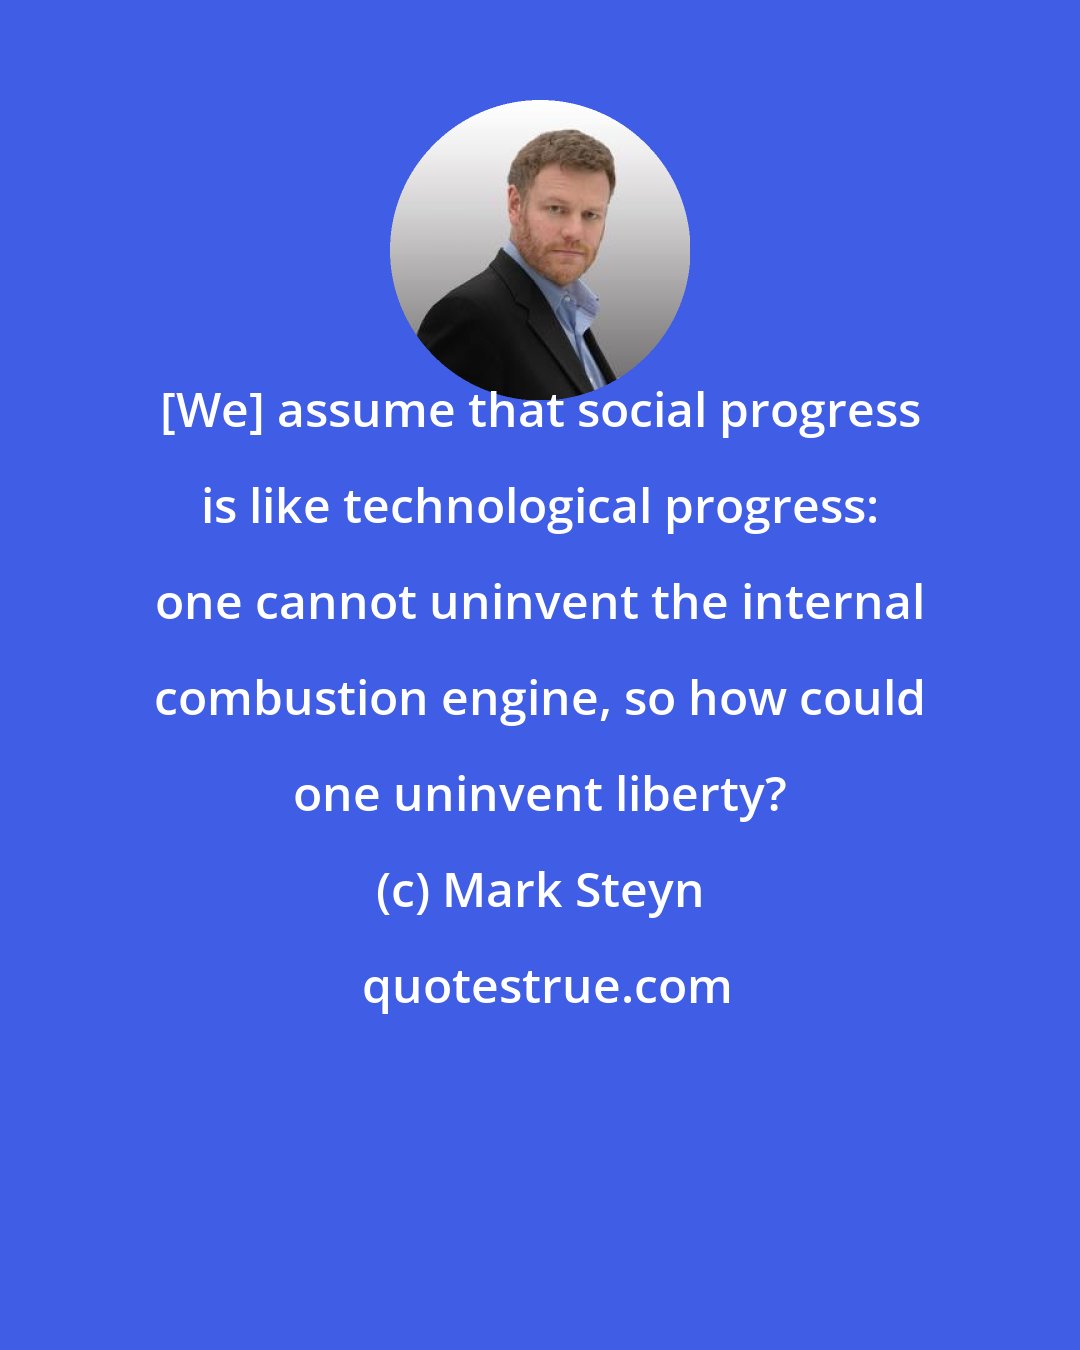 Mark Steyn: [We] assume that social progress is like technological progress: one cannot uninvent the internal combustion engine, so how could one uninvent liberty?